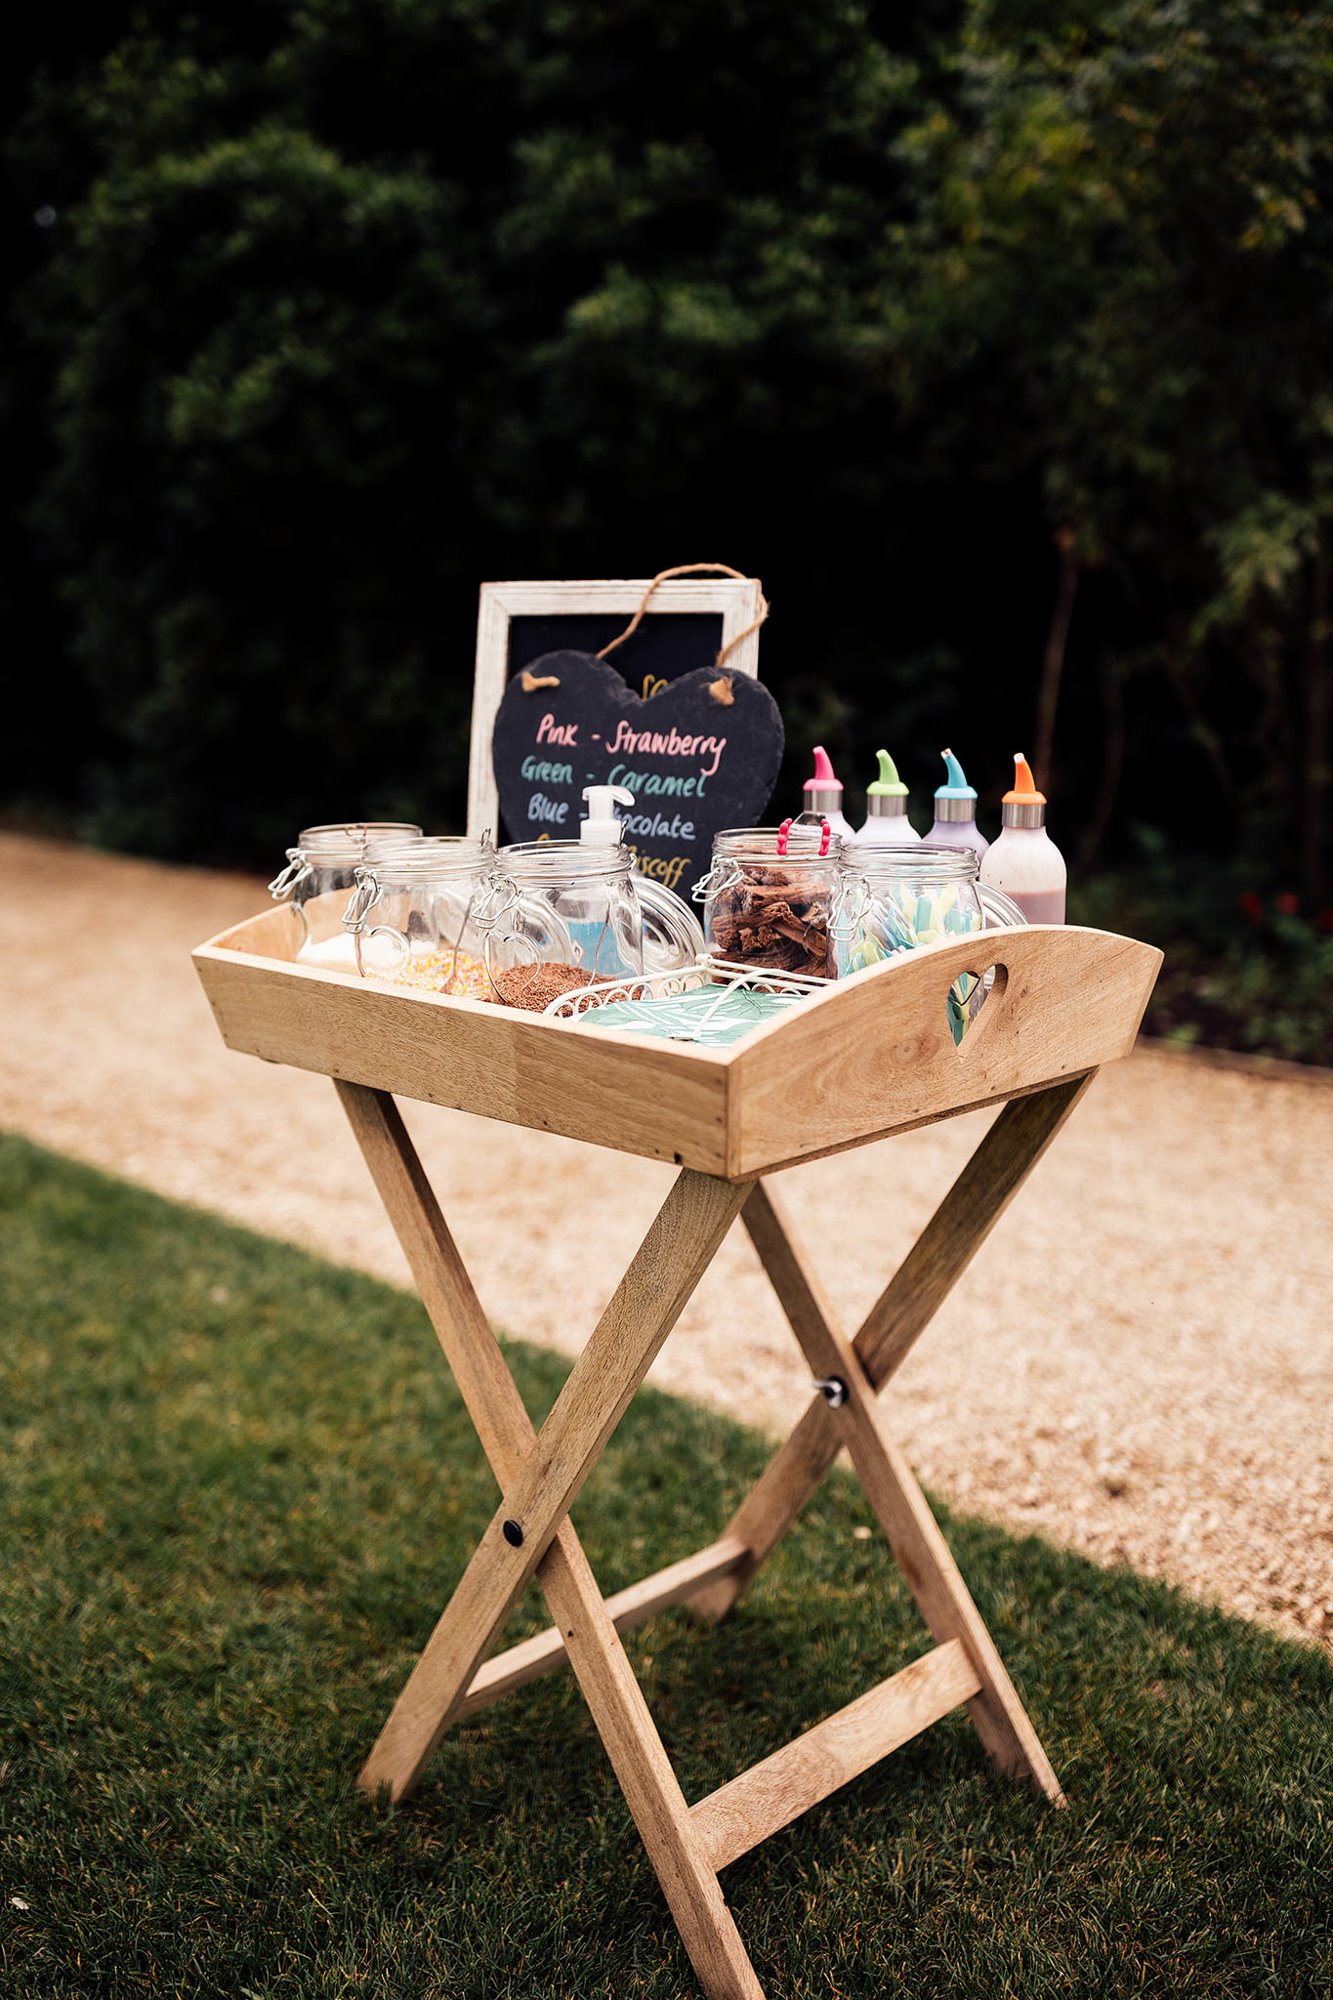 Pimp your ice cream station at a vintage garden party theme wedding in the cotswolds